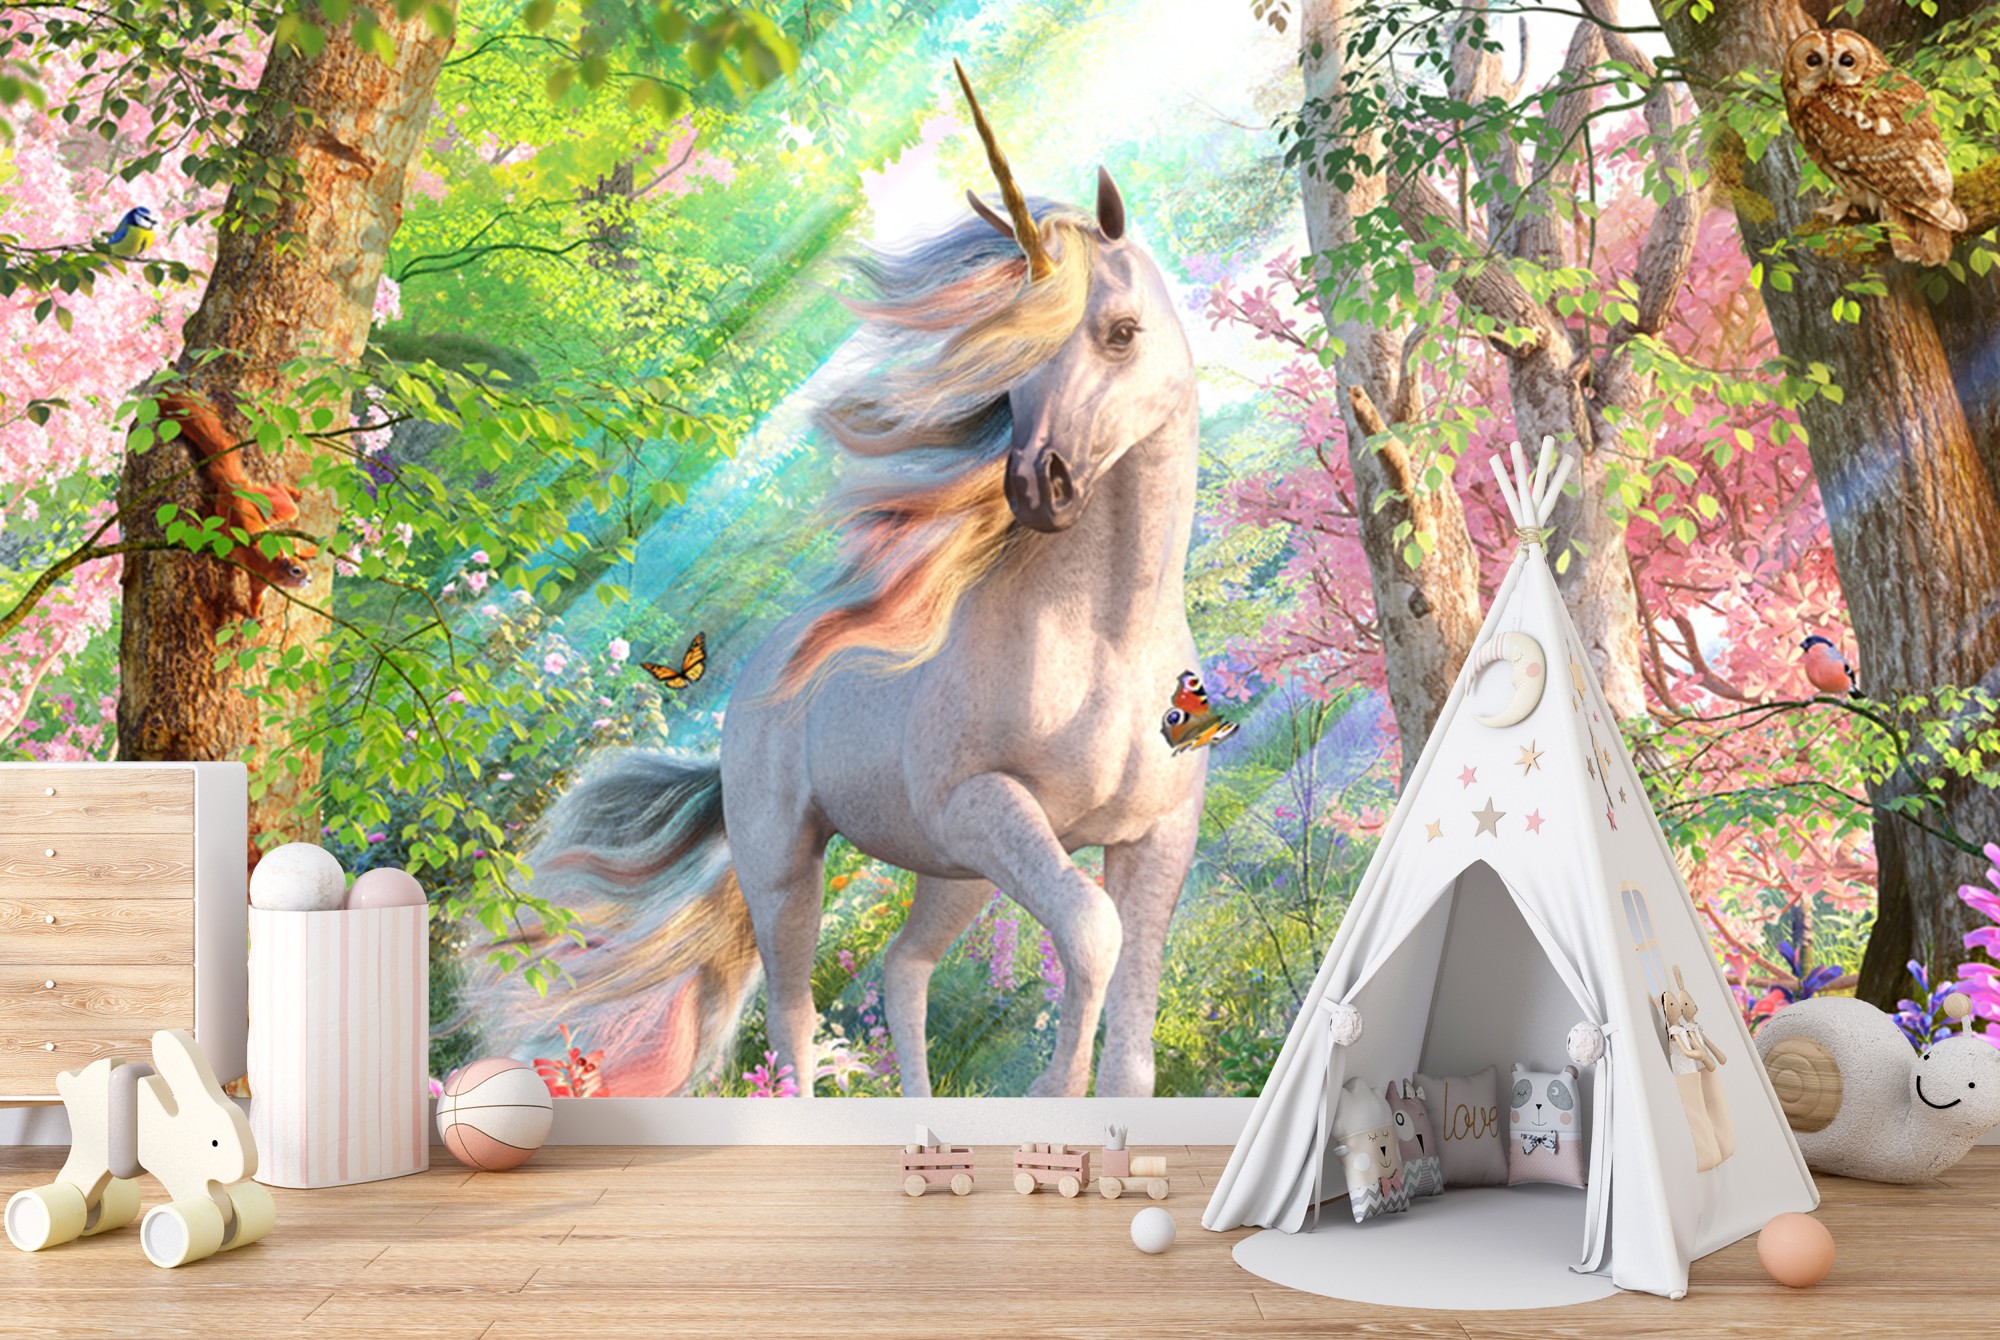 Unicorn Fantasy Forest Wall Stickers Mural Decal Poster Print Art AZ47 